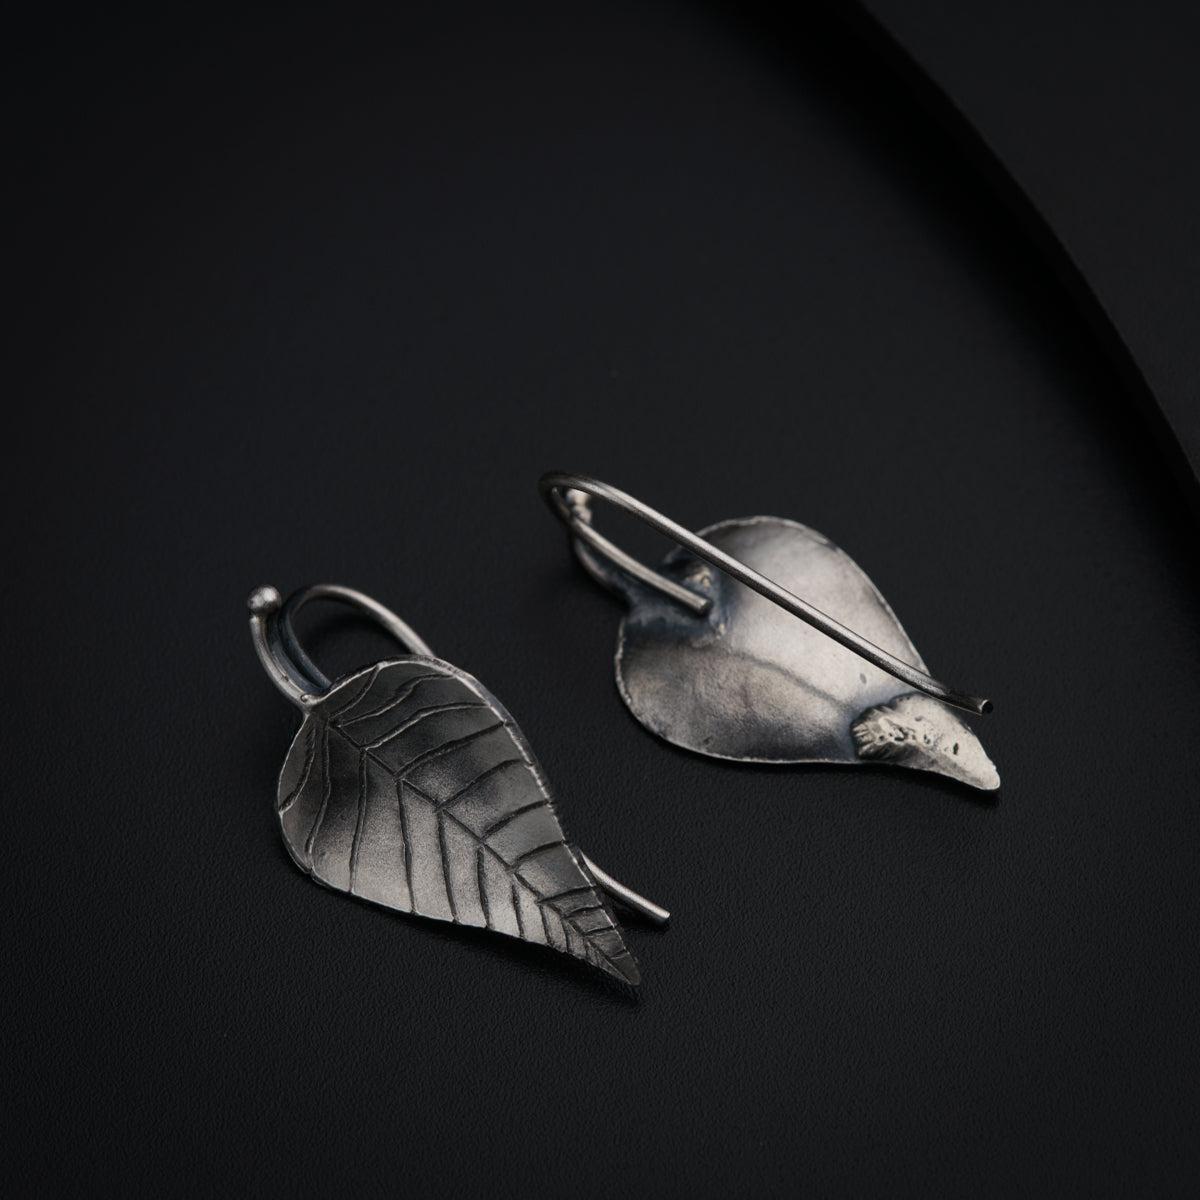 a pair of silver leaf earrings on a black surface